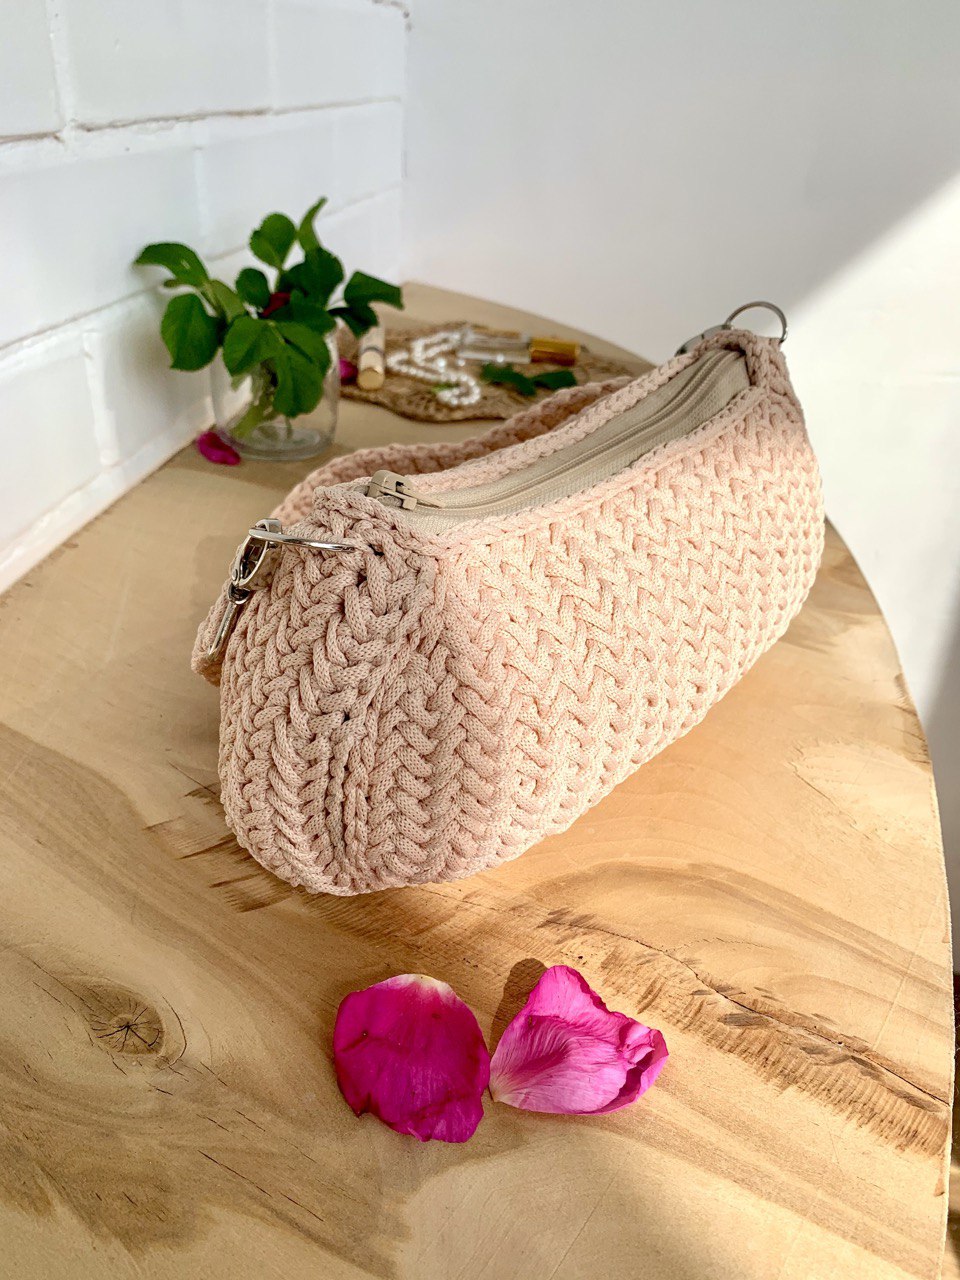 How to Crochet a Small Bag for Beginners Step by Step.Prada inspired baguette  bag.Video Tutorial. - ByStellam